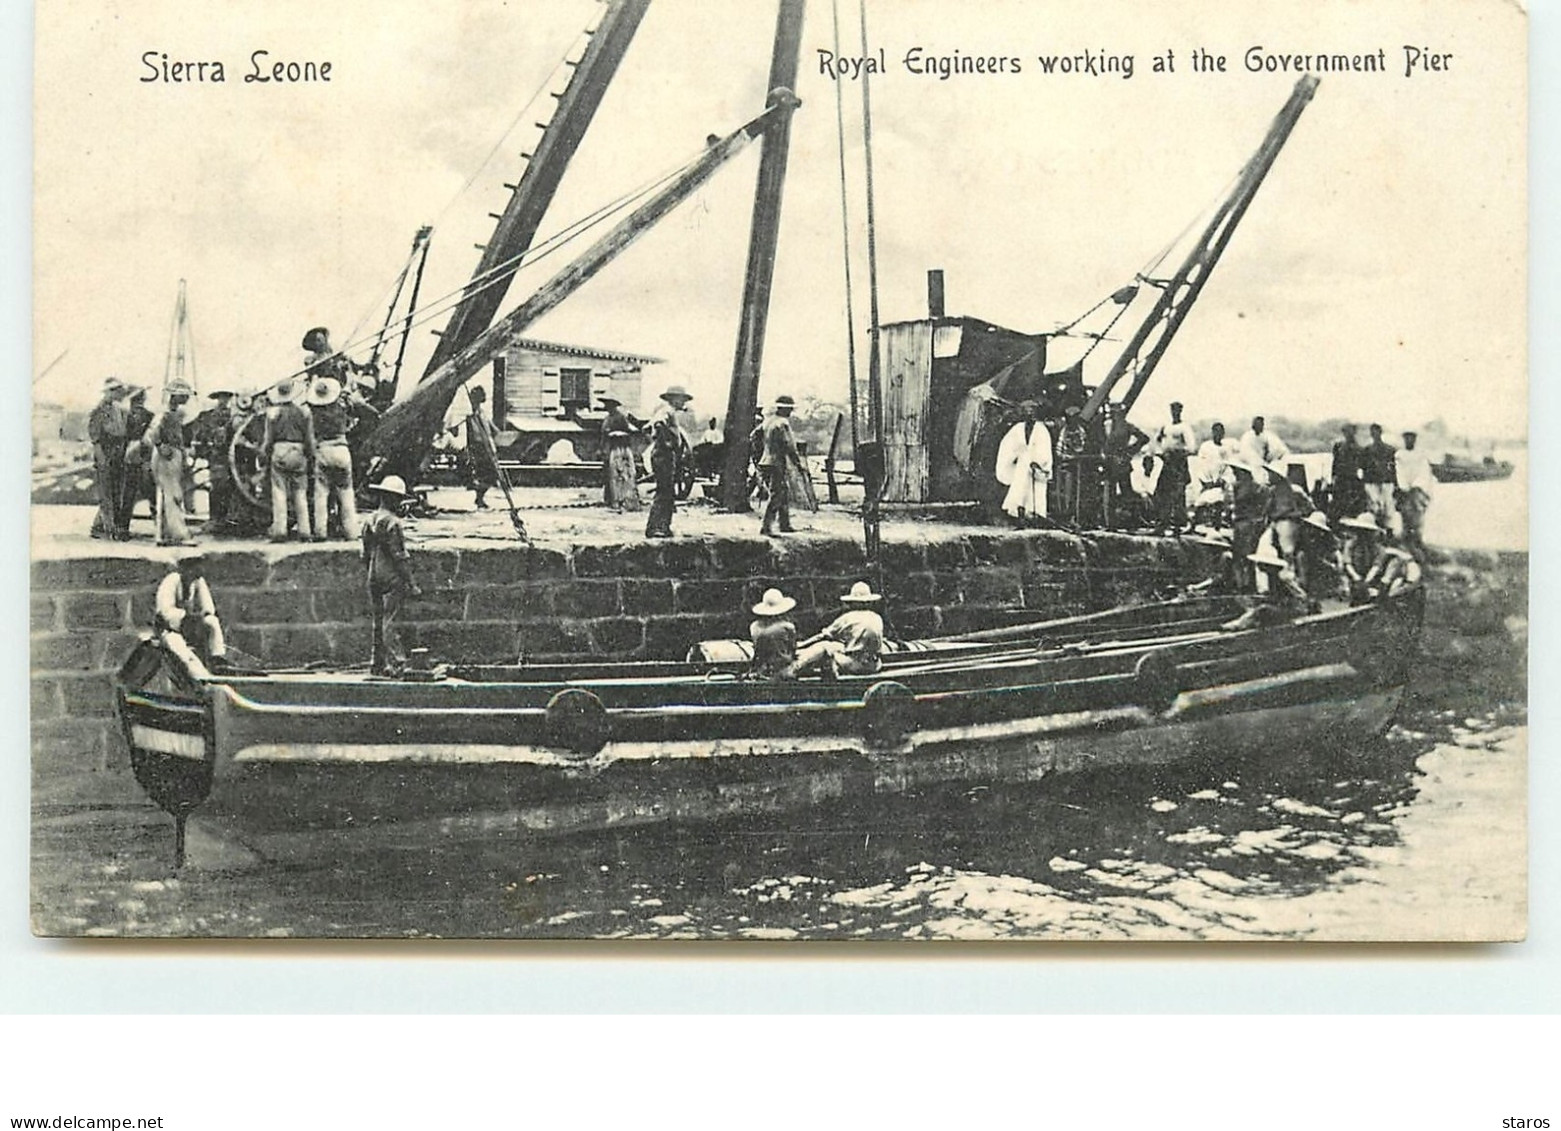 Royal Engineers Working At The Government Pier - Sierra Leone